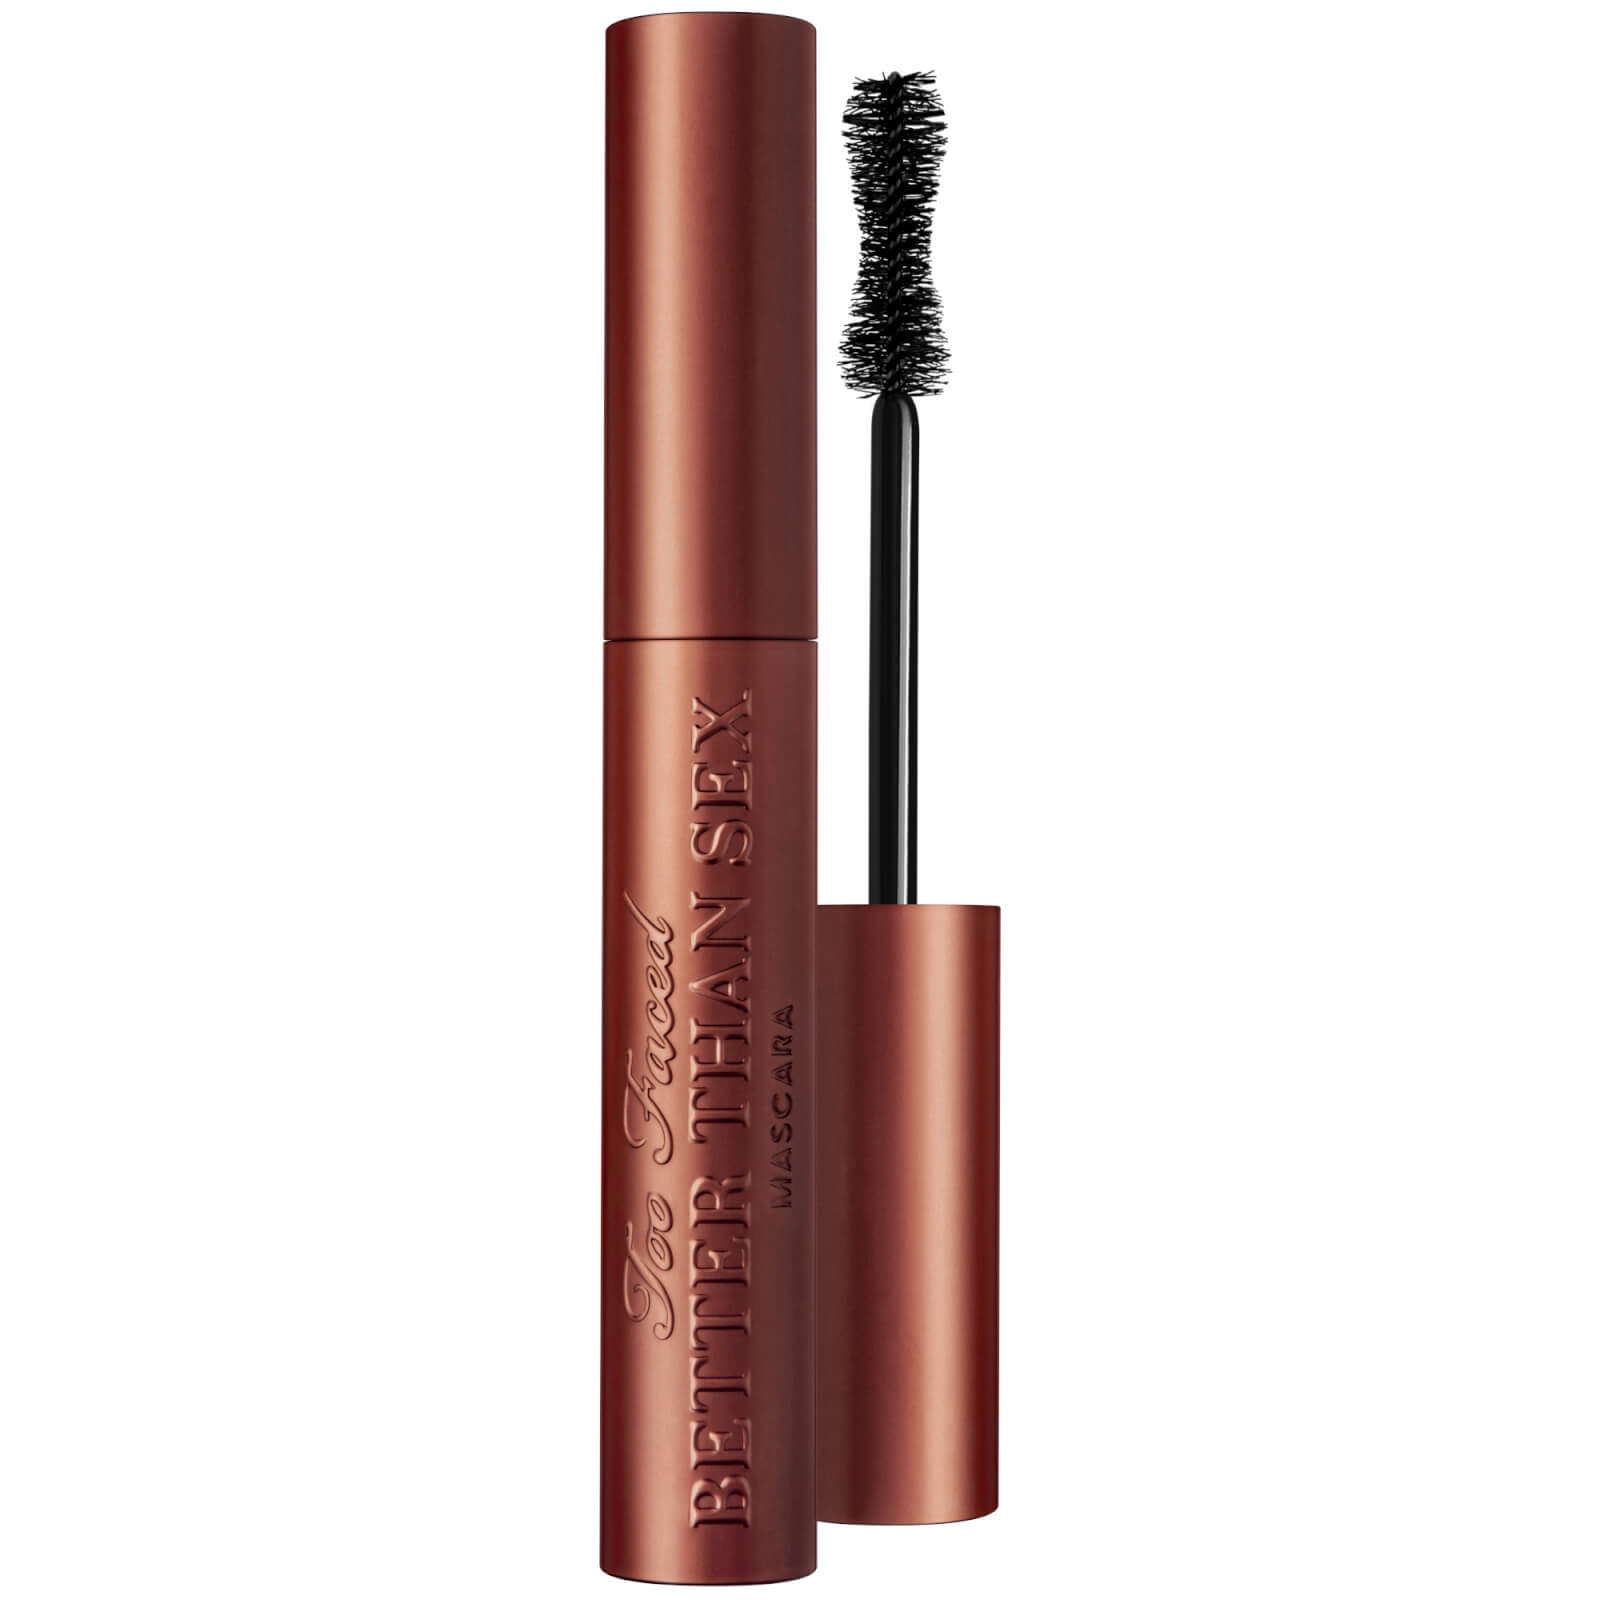 Image of Too Faced Better Than Sex Mascara - Chocolate 8ml